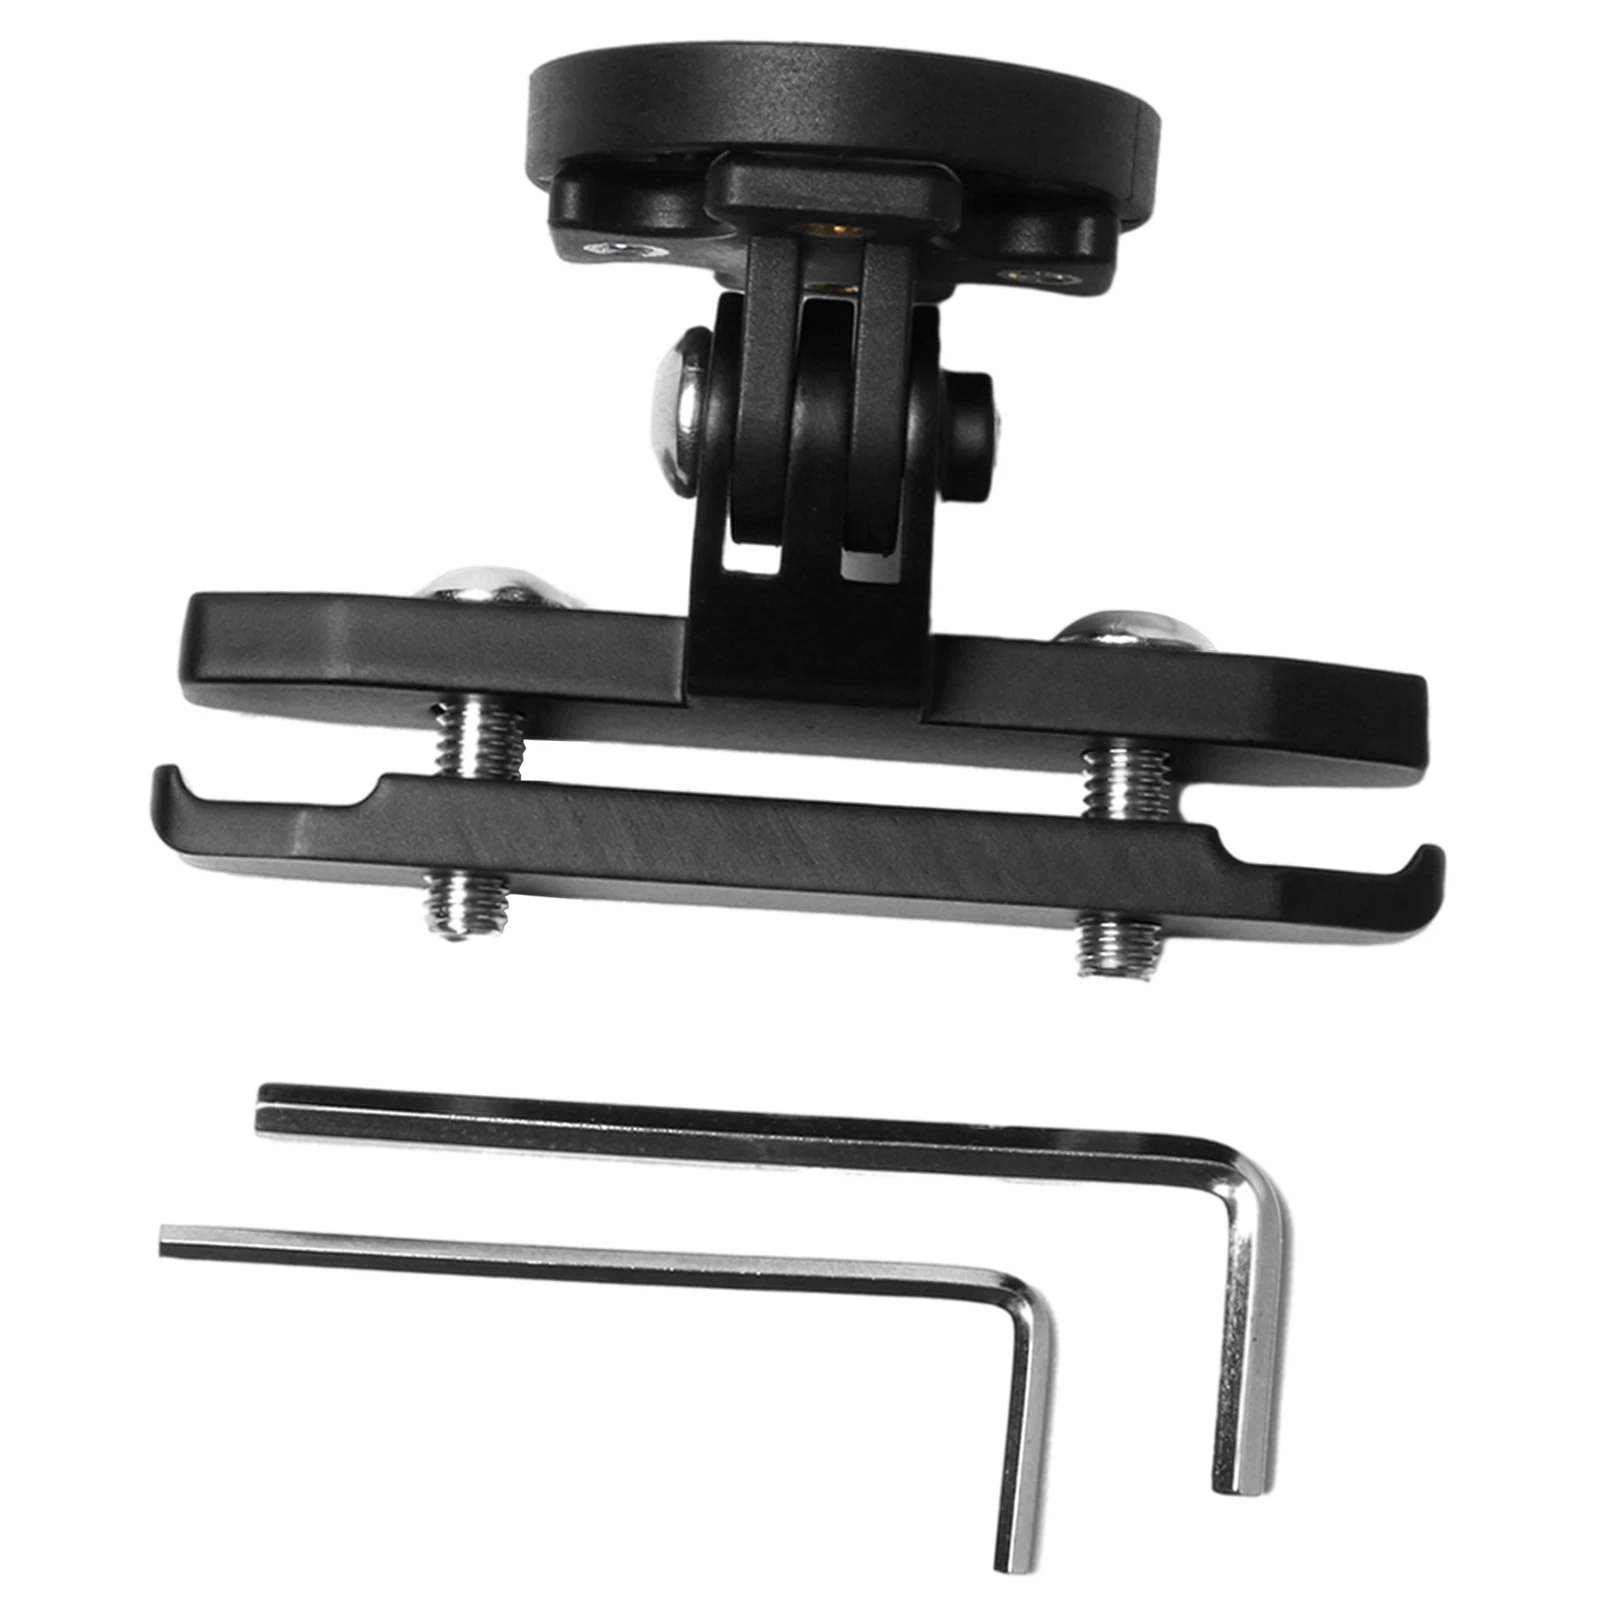 Bicycle Tail Light Saddle Seat-post Mount Holder Bracket for Garmin Varia Rearview Garmin Support Cradle Accessories